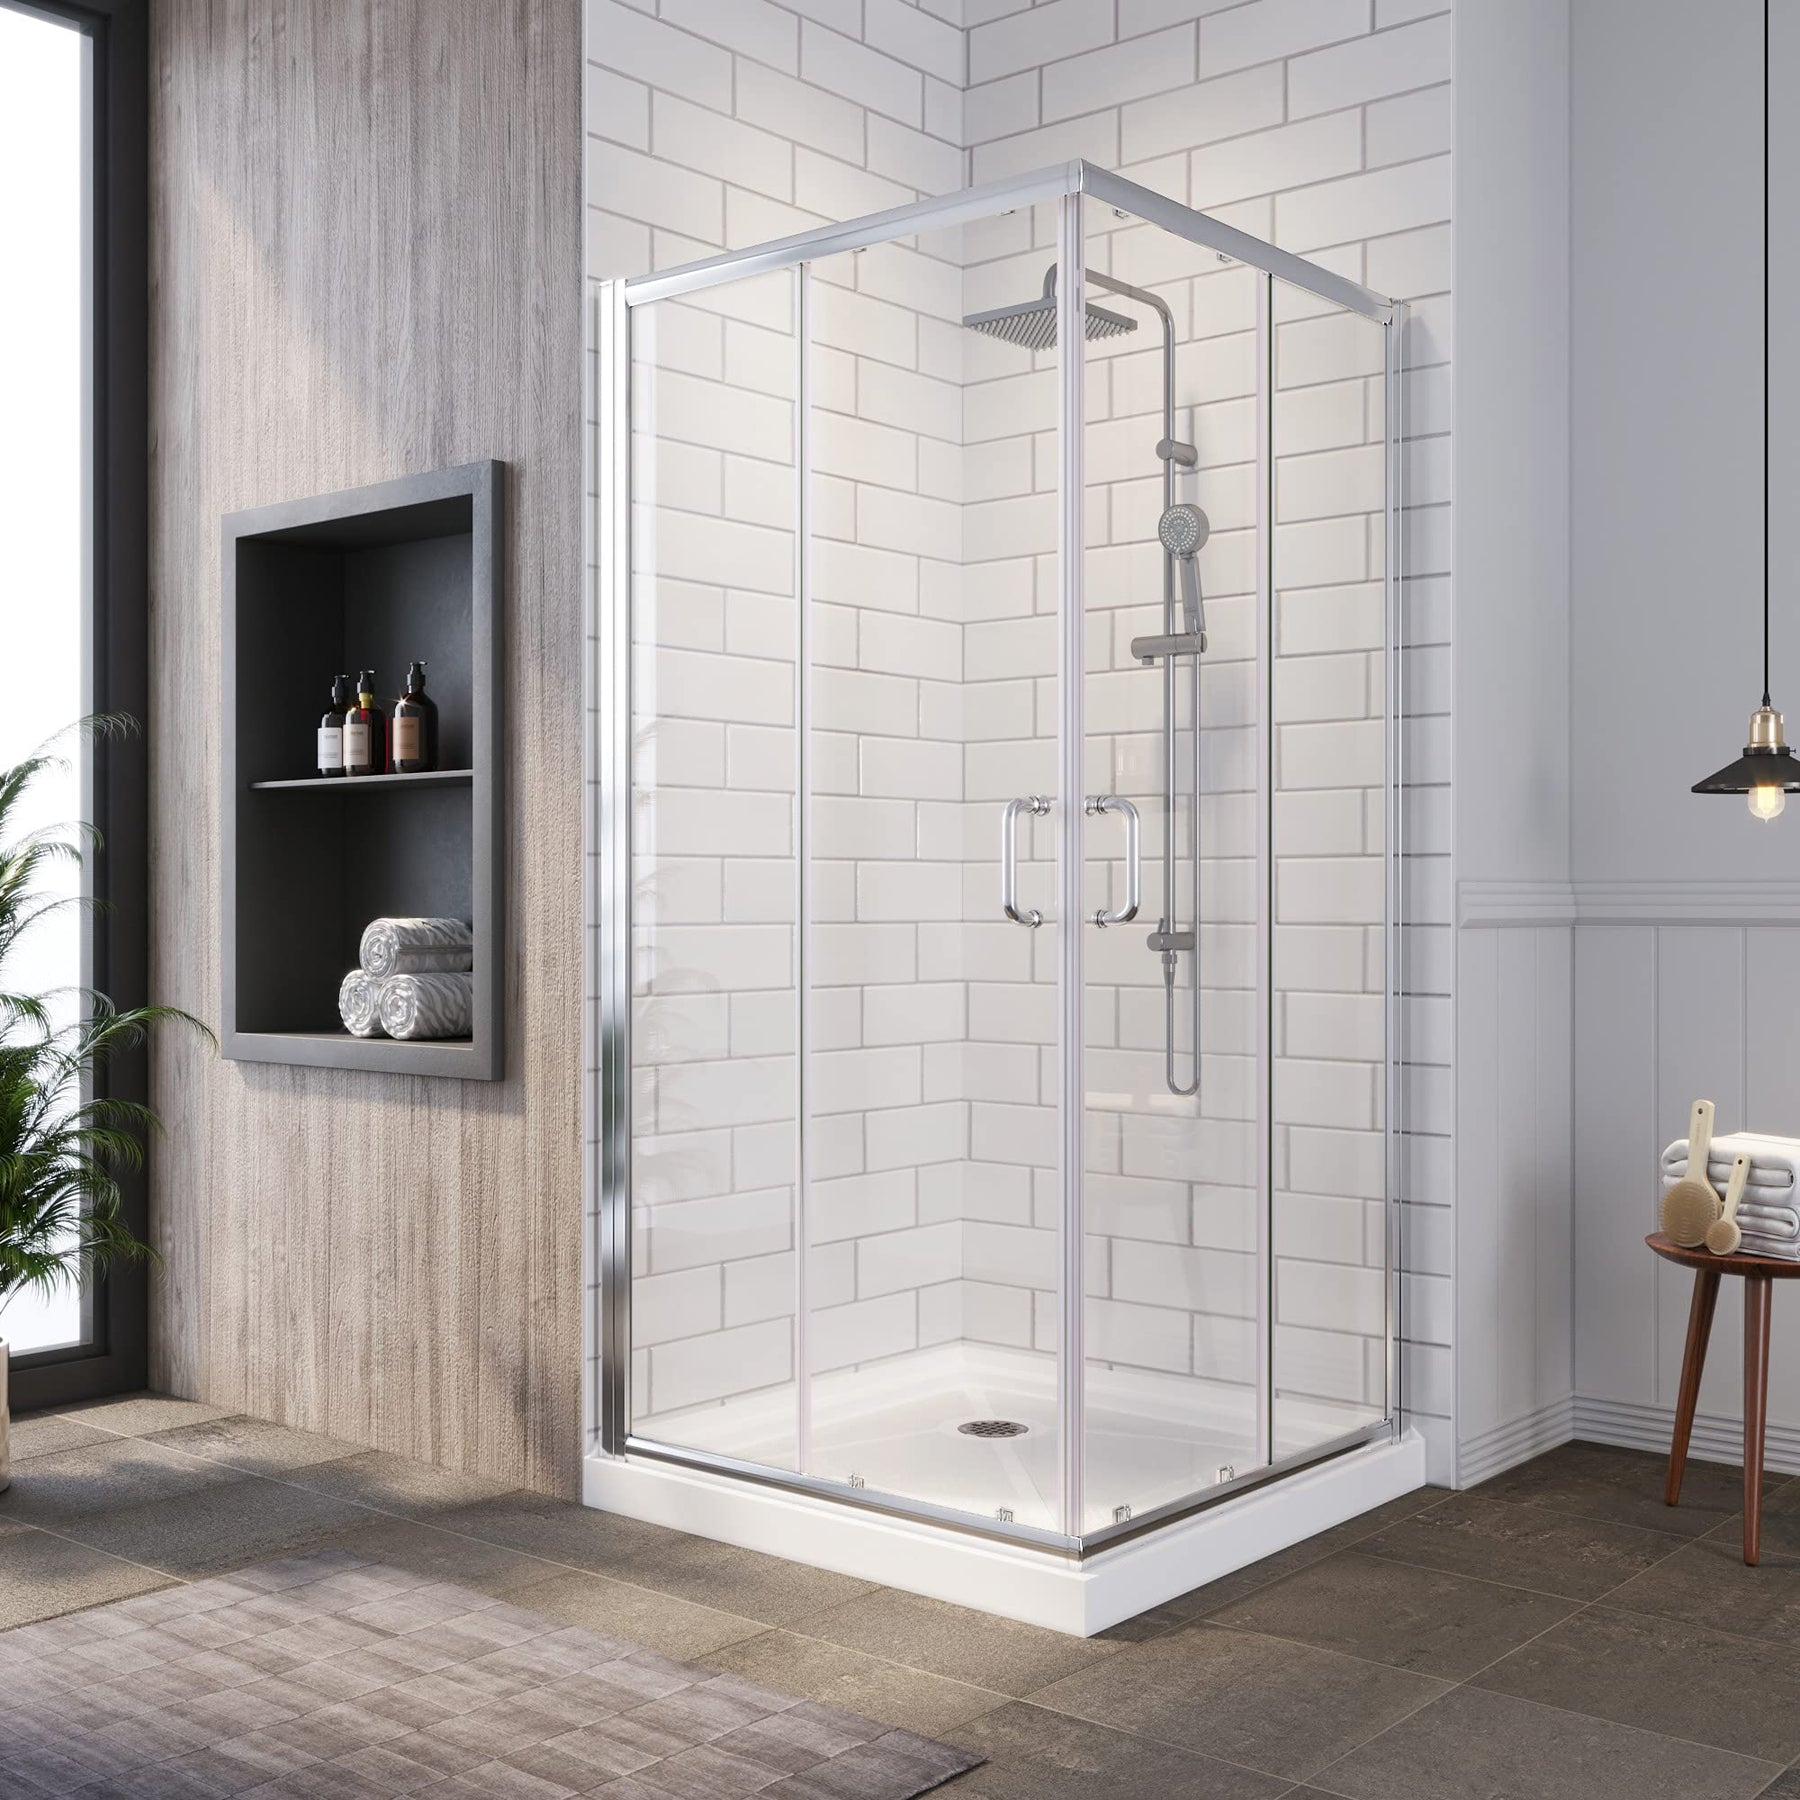 SUNNY SHOWER 36 in. W X 36 in. W X 72 in. H Chrome Finish Corner Entry Enclosure With Sliding Doors